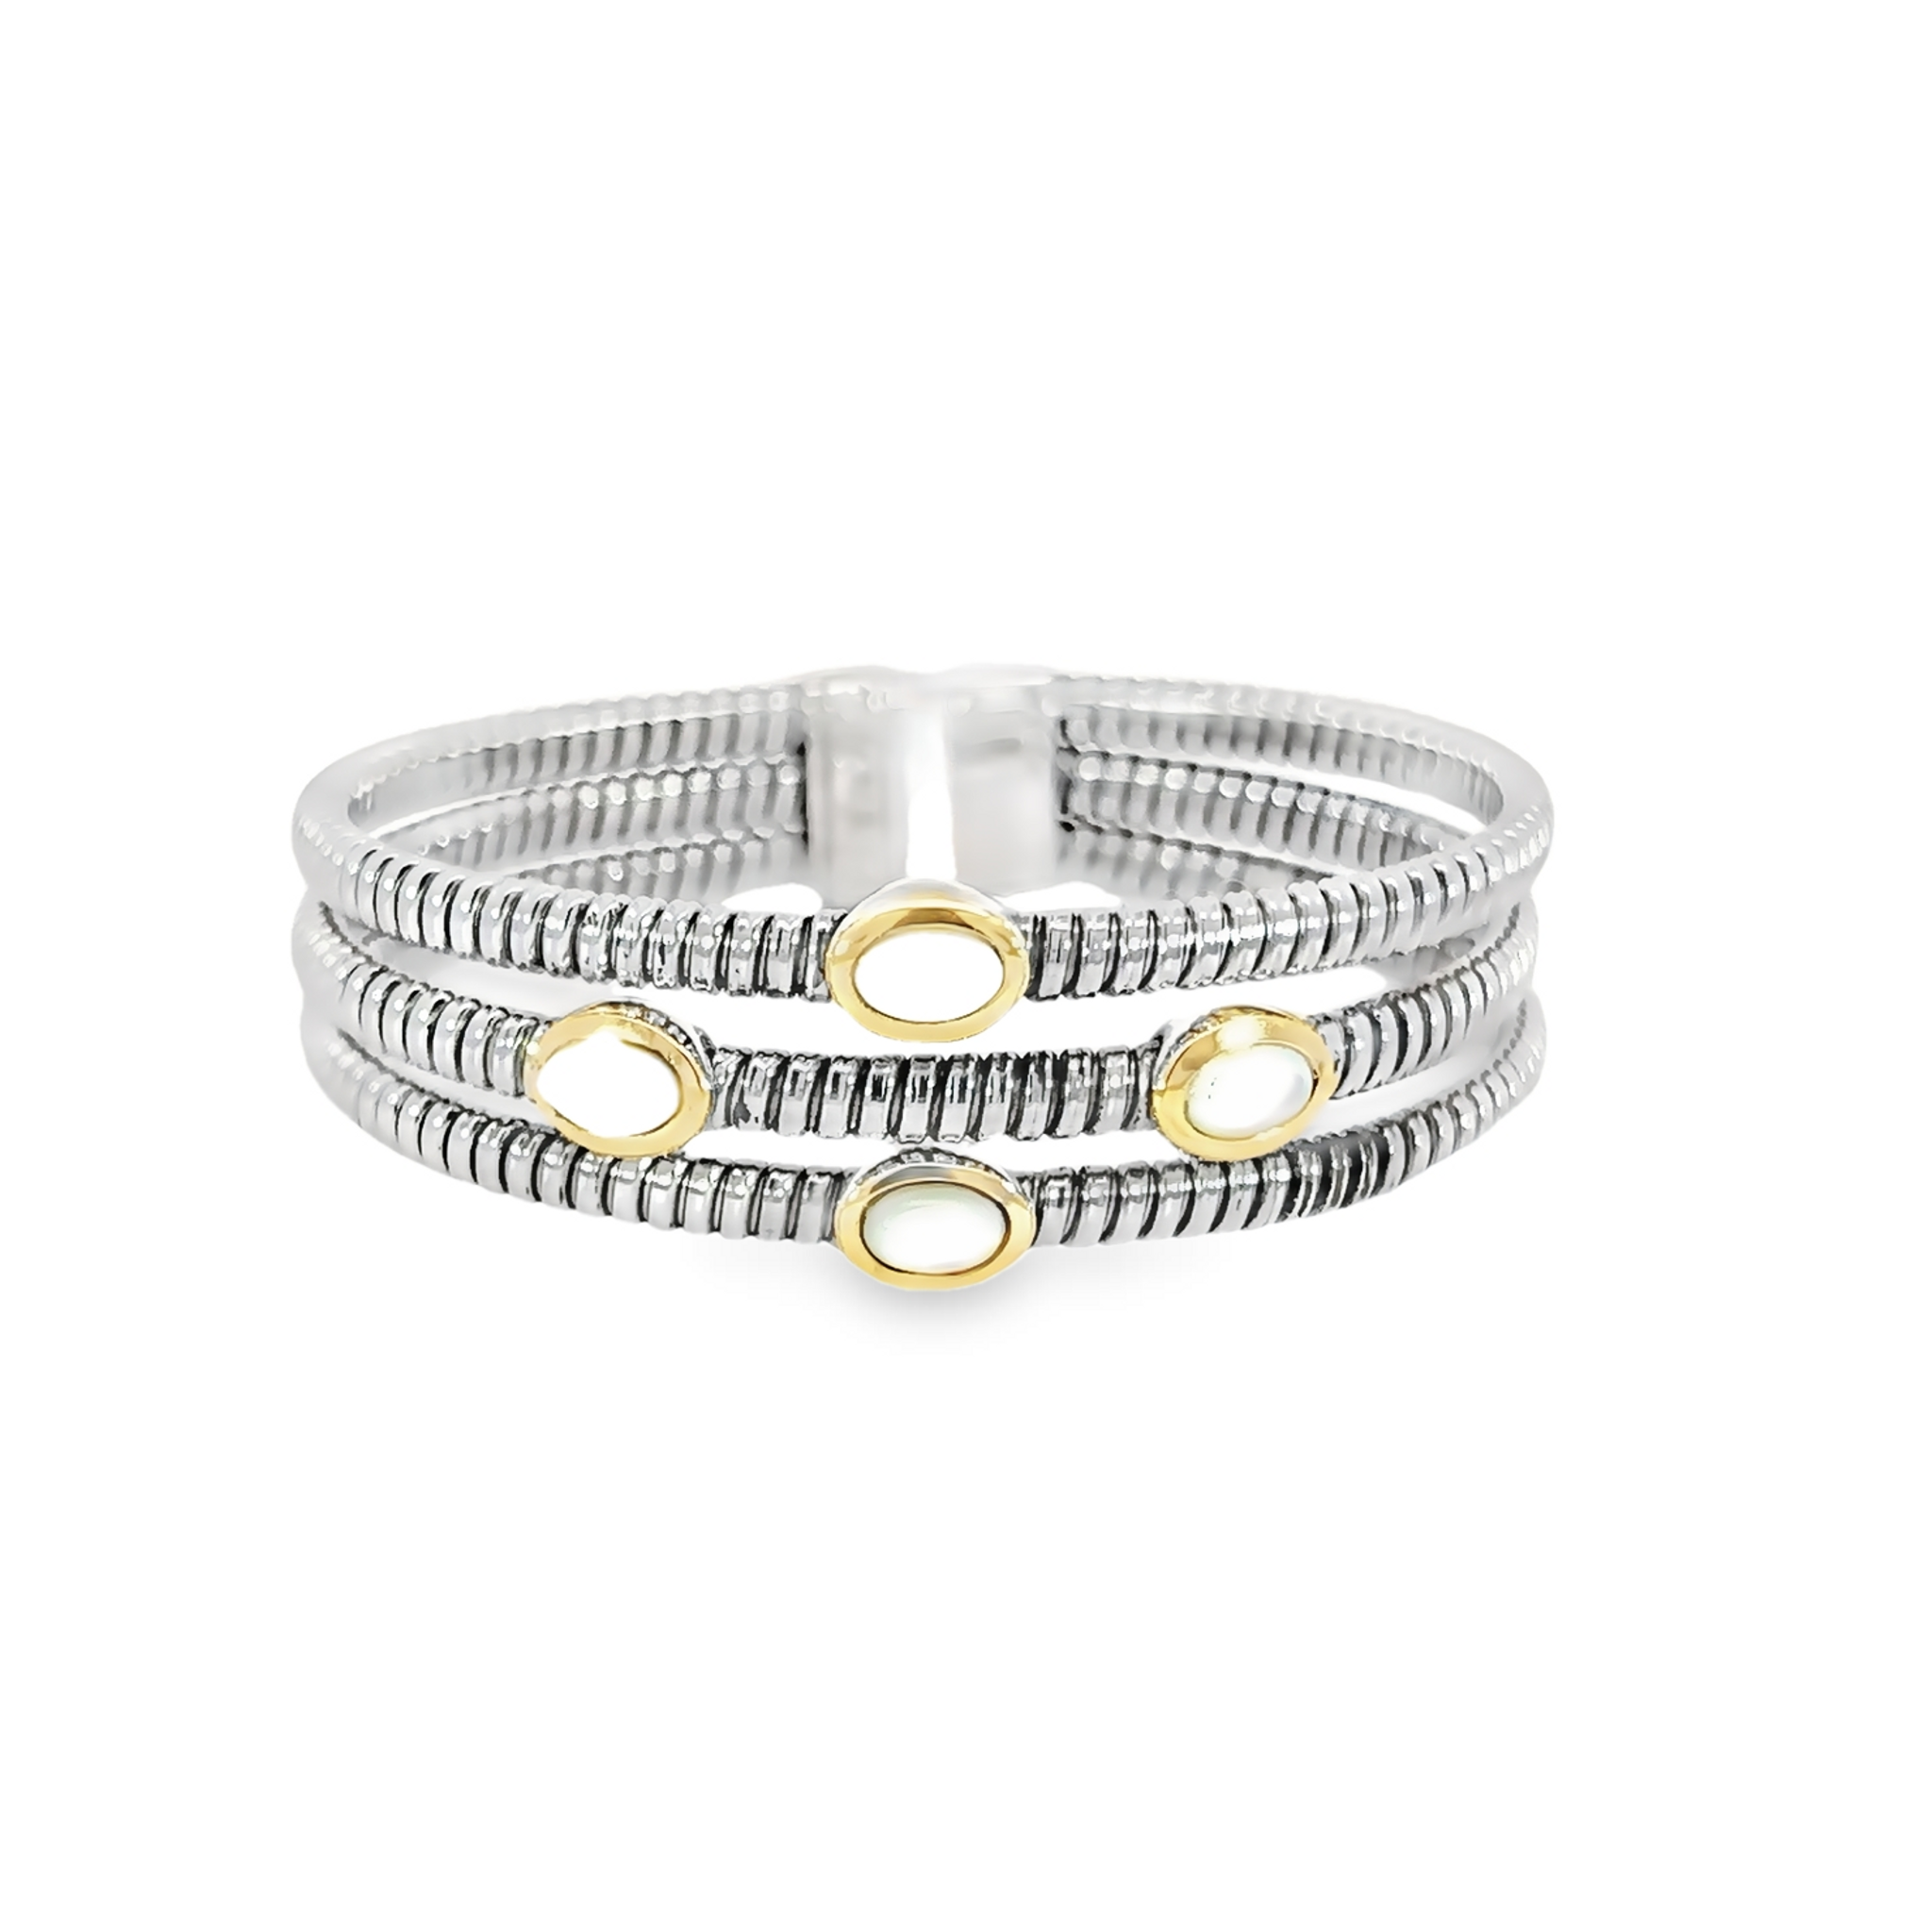 Stainless Steel Mother Of Pearl Bangle Bracelet